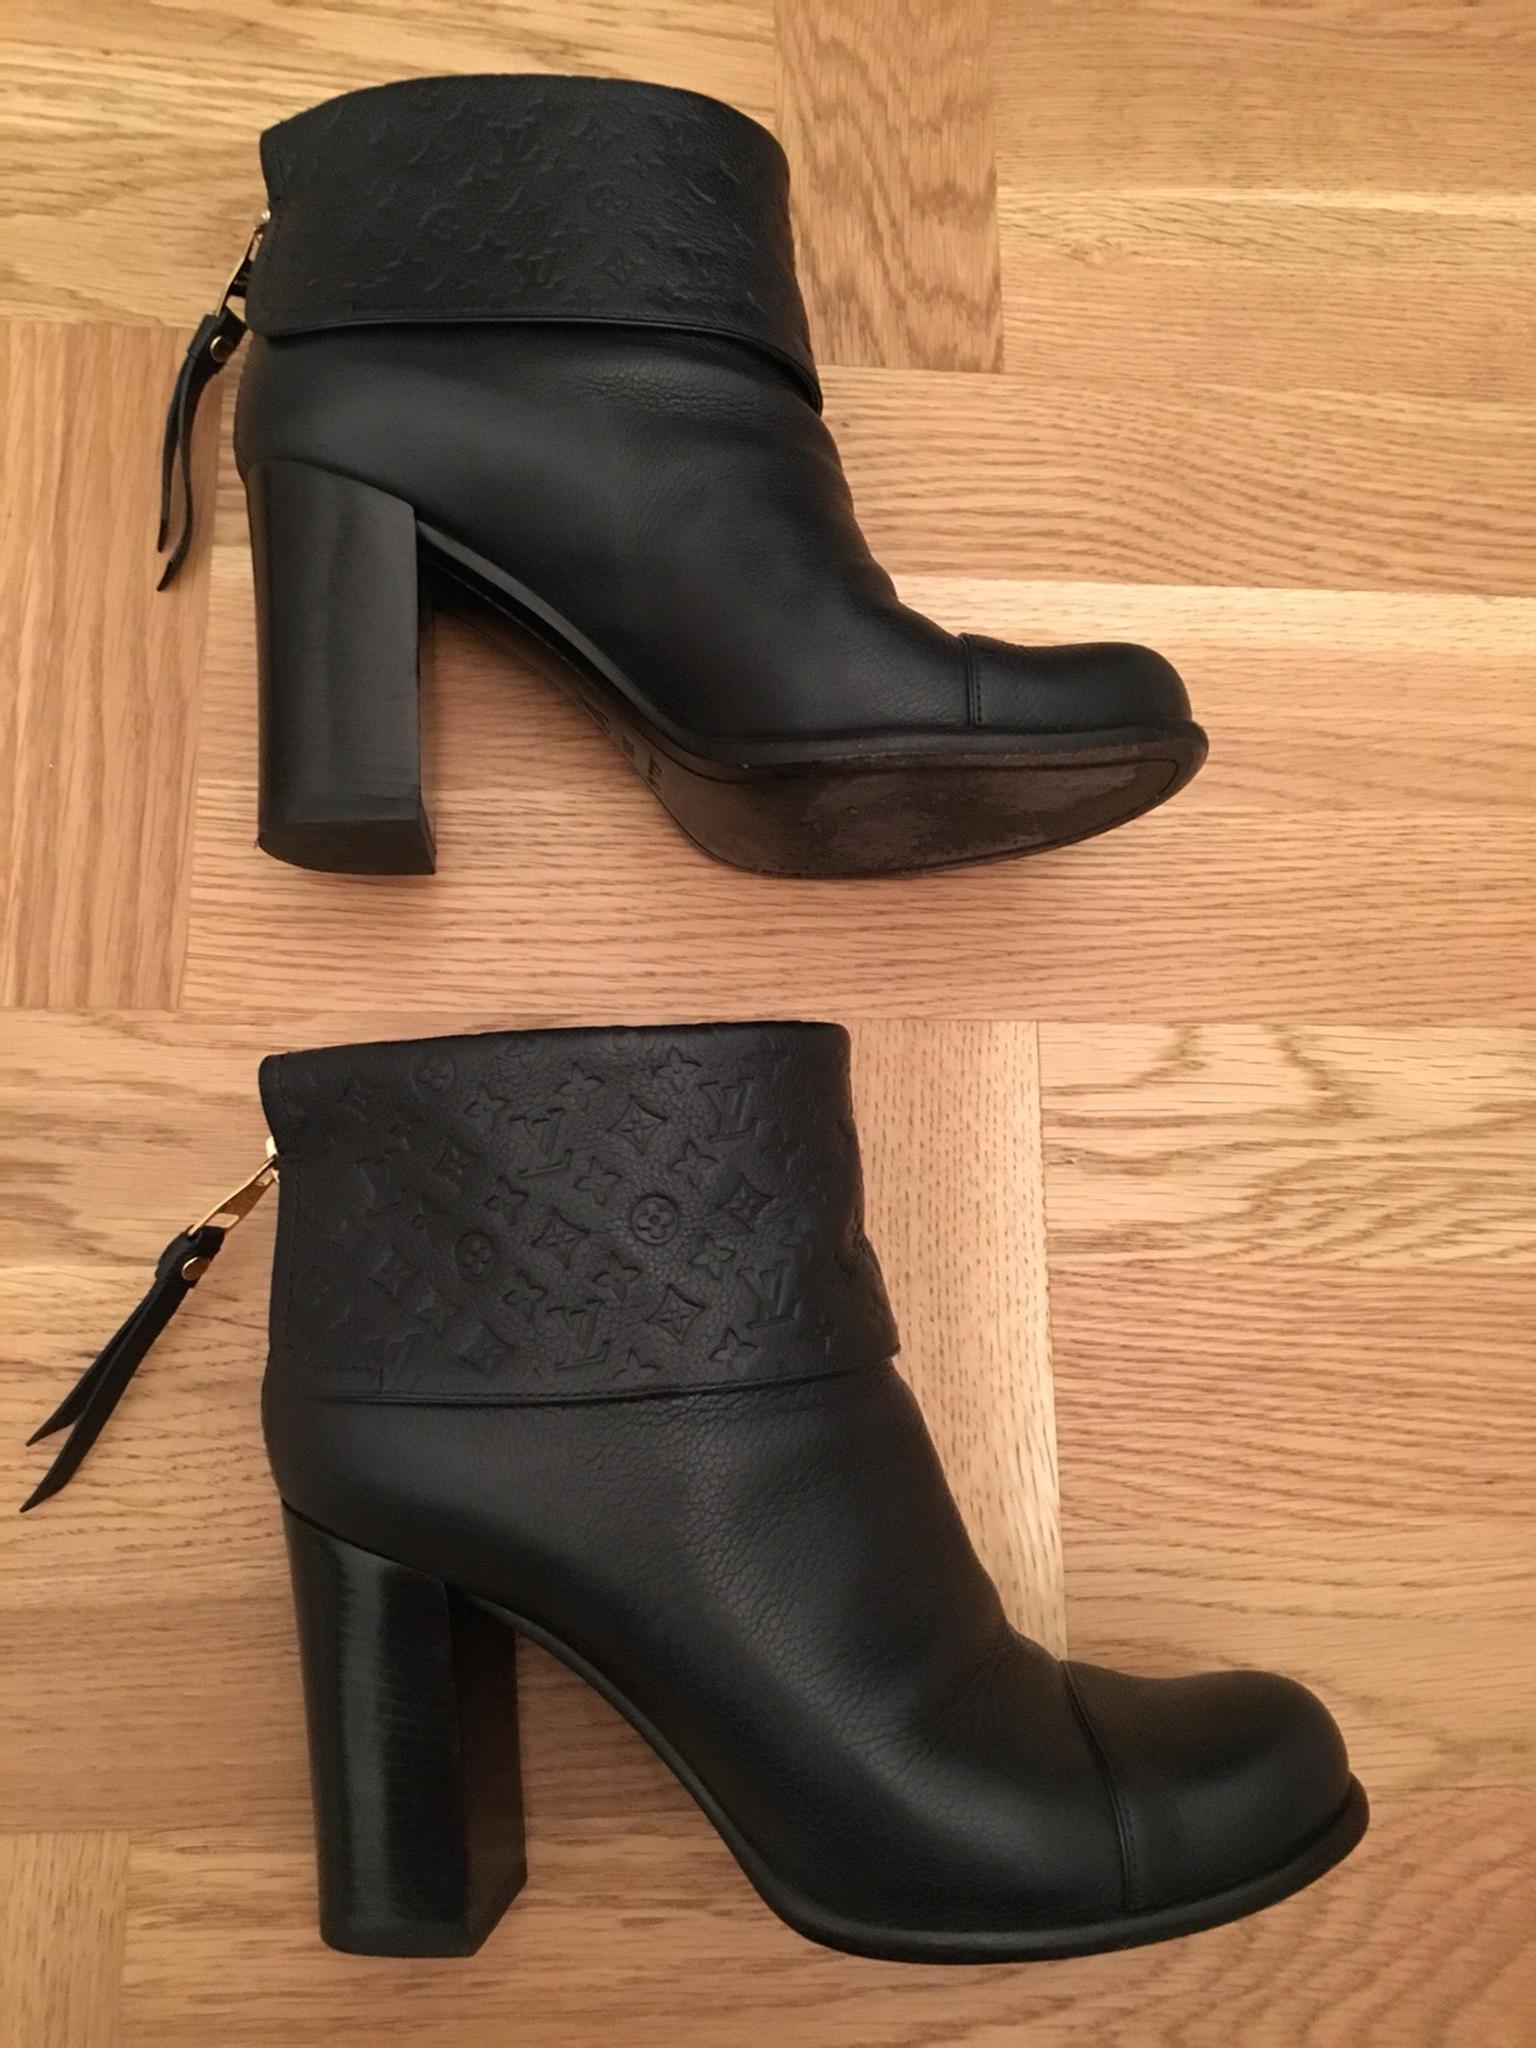 Louis Vuitton Navy Ankle boots in SW1V London for £550.00 for sale | Shpock